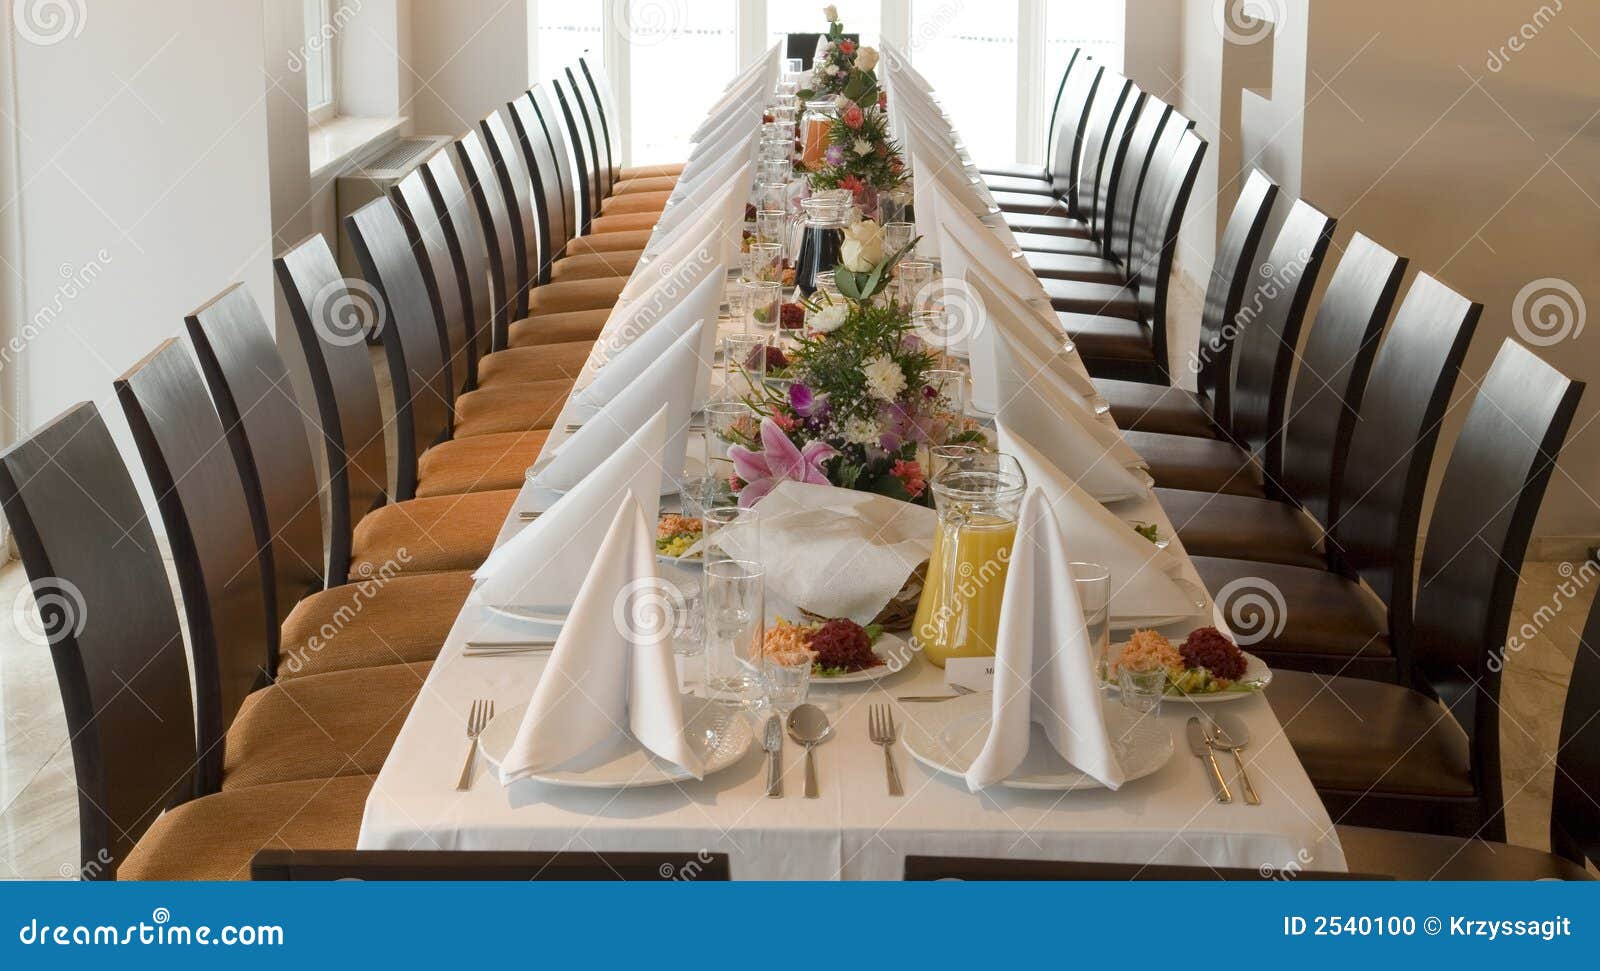 Long Banquet Ttable Stock Photo - Image: 2540100